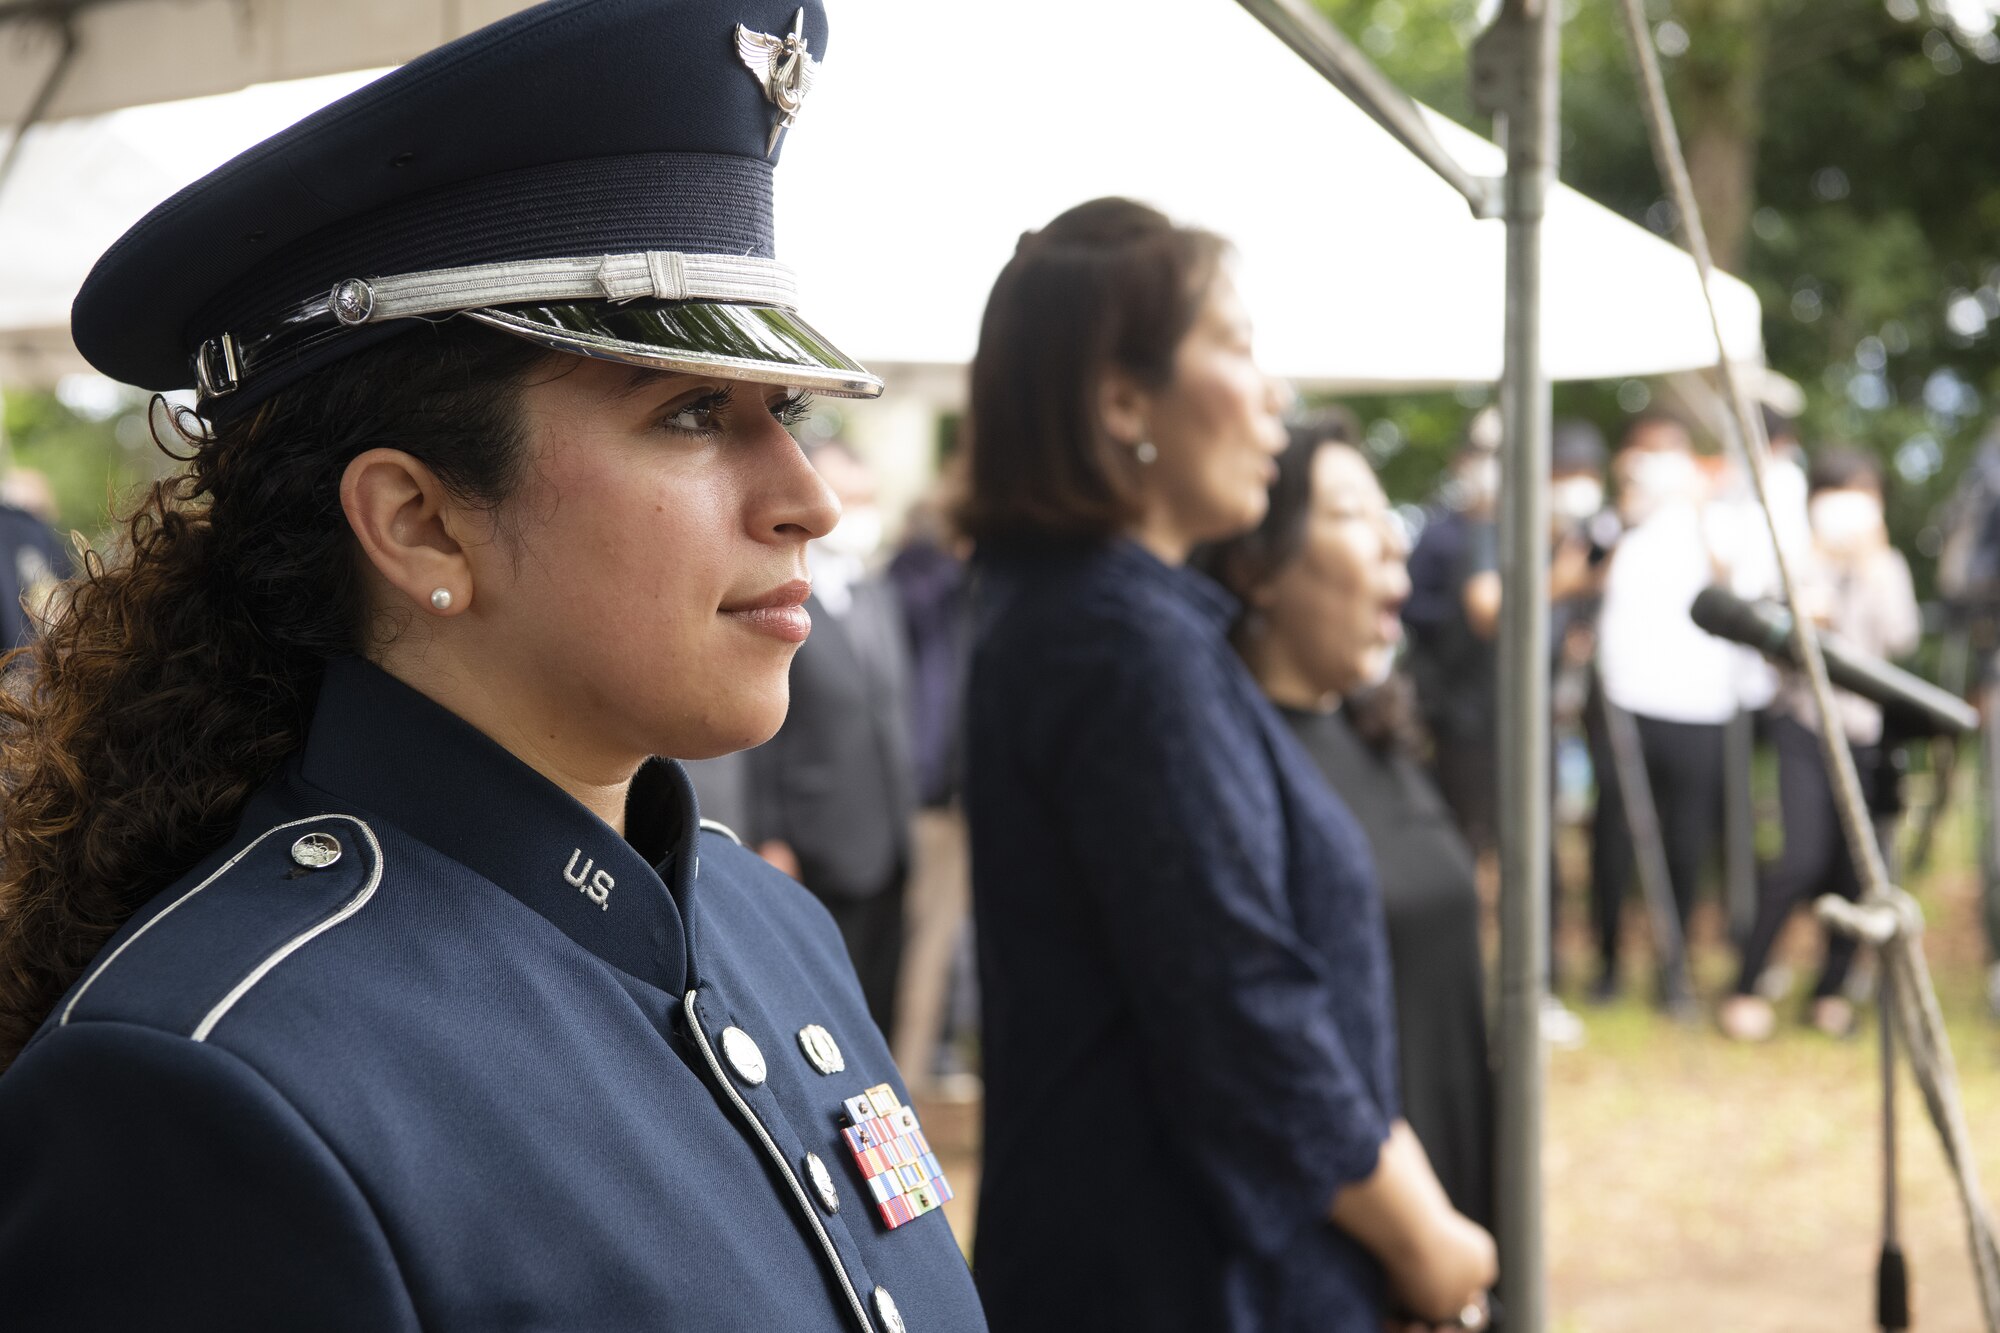 U.S. Air Force Senior Airman Alycia Cancel, U.S. Air Force Band of the Pacific regional bandsman vocalist, foreground, listens as Riho Tagawa and Chieko Nakatogawa, sing “Kimigayo,” the national anthem of Japan, during a U.S.-Japan Joint Memorial Service June 11, 2022, at Mt. Shizuhata, Shizuoka city, Japan. The memorial service provided participants the opportunity to honor those who lost their lives during a World War II air raid on June 20, 1945. During the raid, two U.S. Army Air Forces B-29 Superfortresses collided mid-air over Shizuoka City, resulting in the death of 23 Airmen on board the aircraft. Representatives of the U.S. Air Force’s Yokota Air Base, Japan Self Defense Force, and Shizuoka City rendered their respects to the Airmen and Japanese civilians who lost their lives as a result of the tragedy, and reflected on the strong alliance the U.S. and Japan have forged since the end of World War II. (U.S. Air Force photo by Tech. Sgt. Christopher Hubenthal)